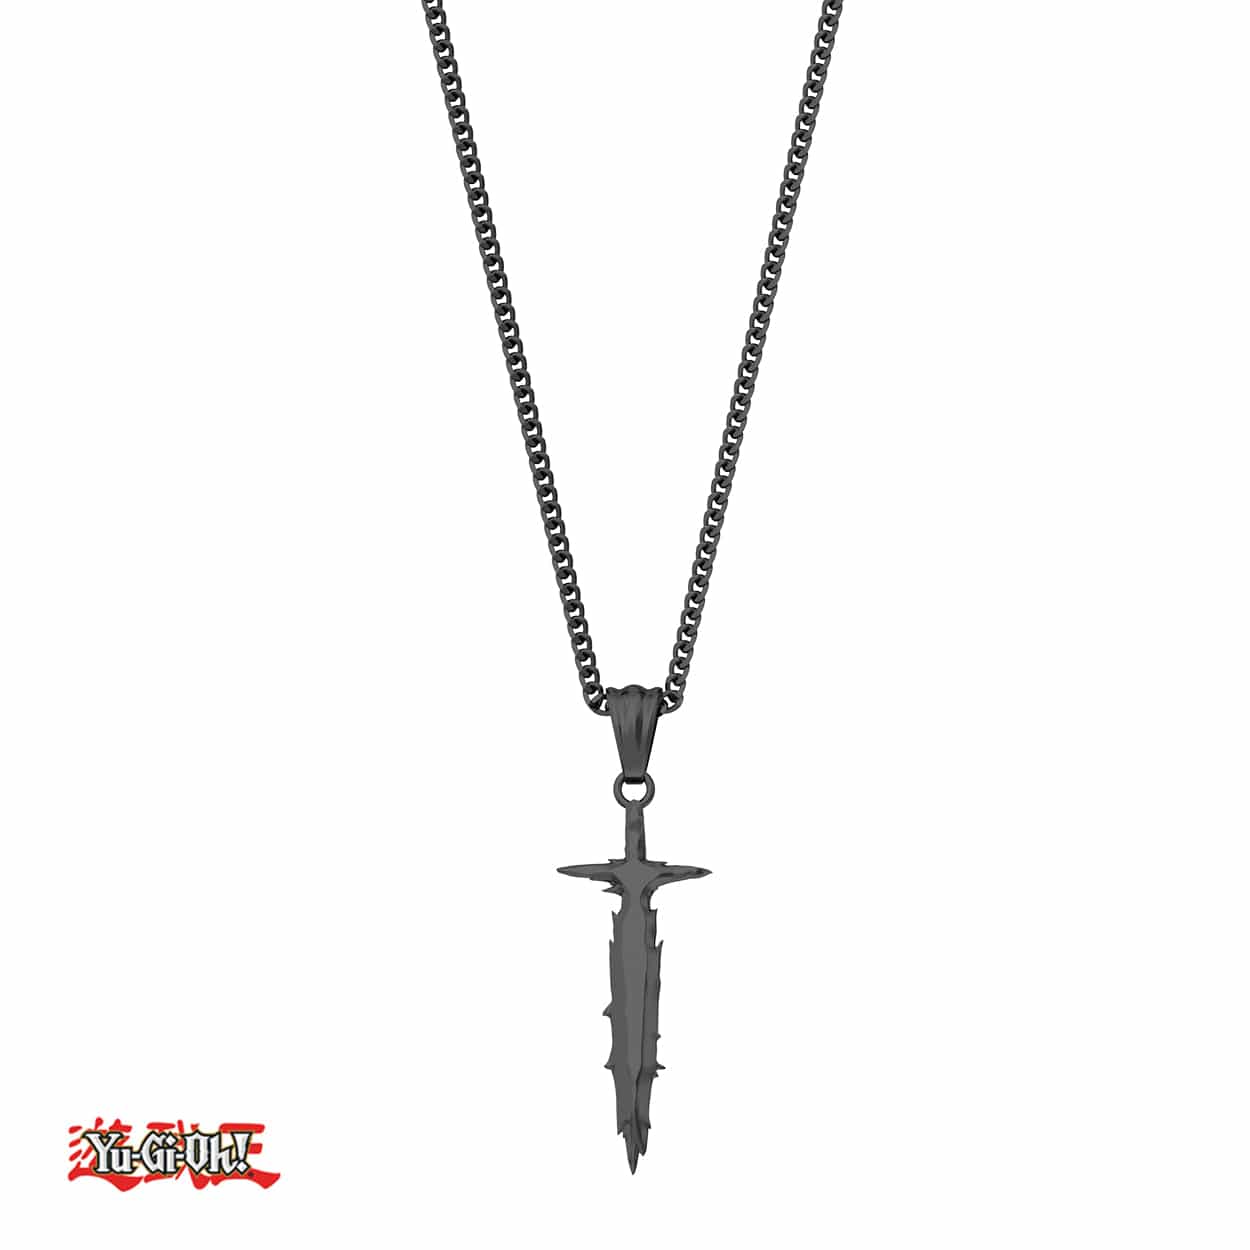 Yu-Gi-Oh!™ Sword Of Revealing Light Necklace